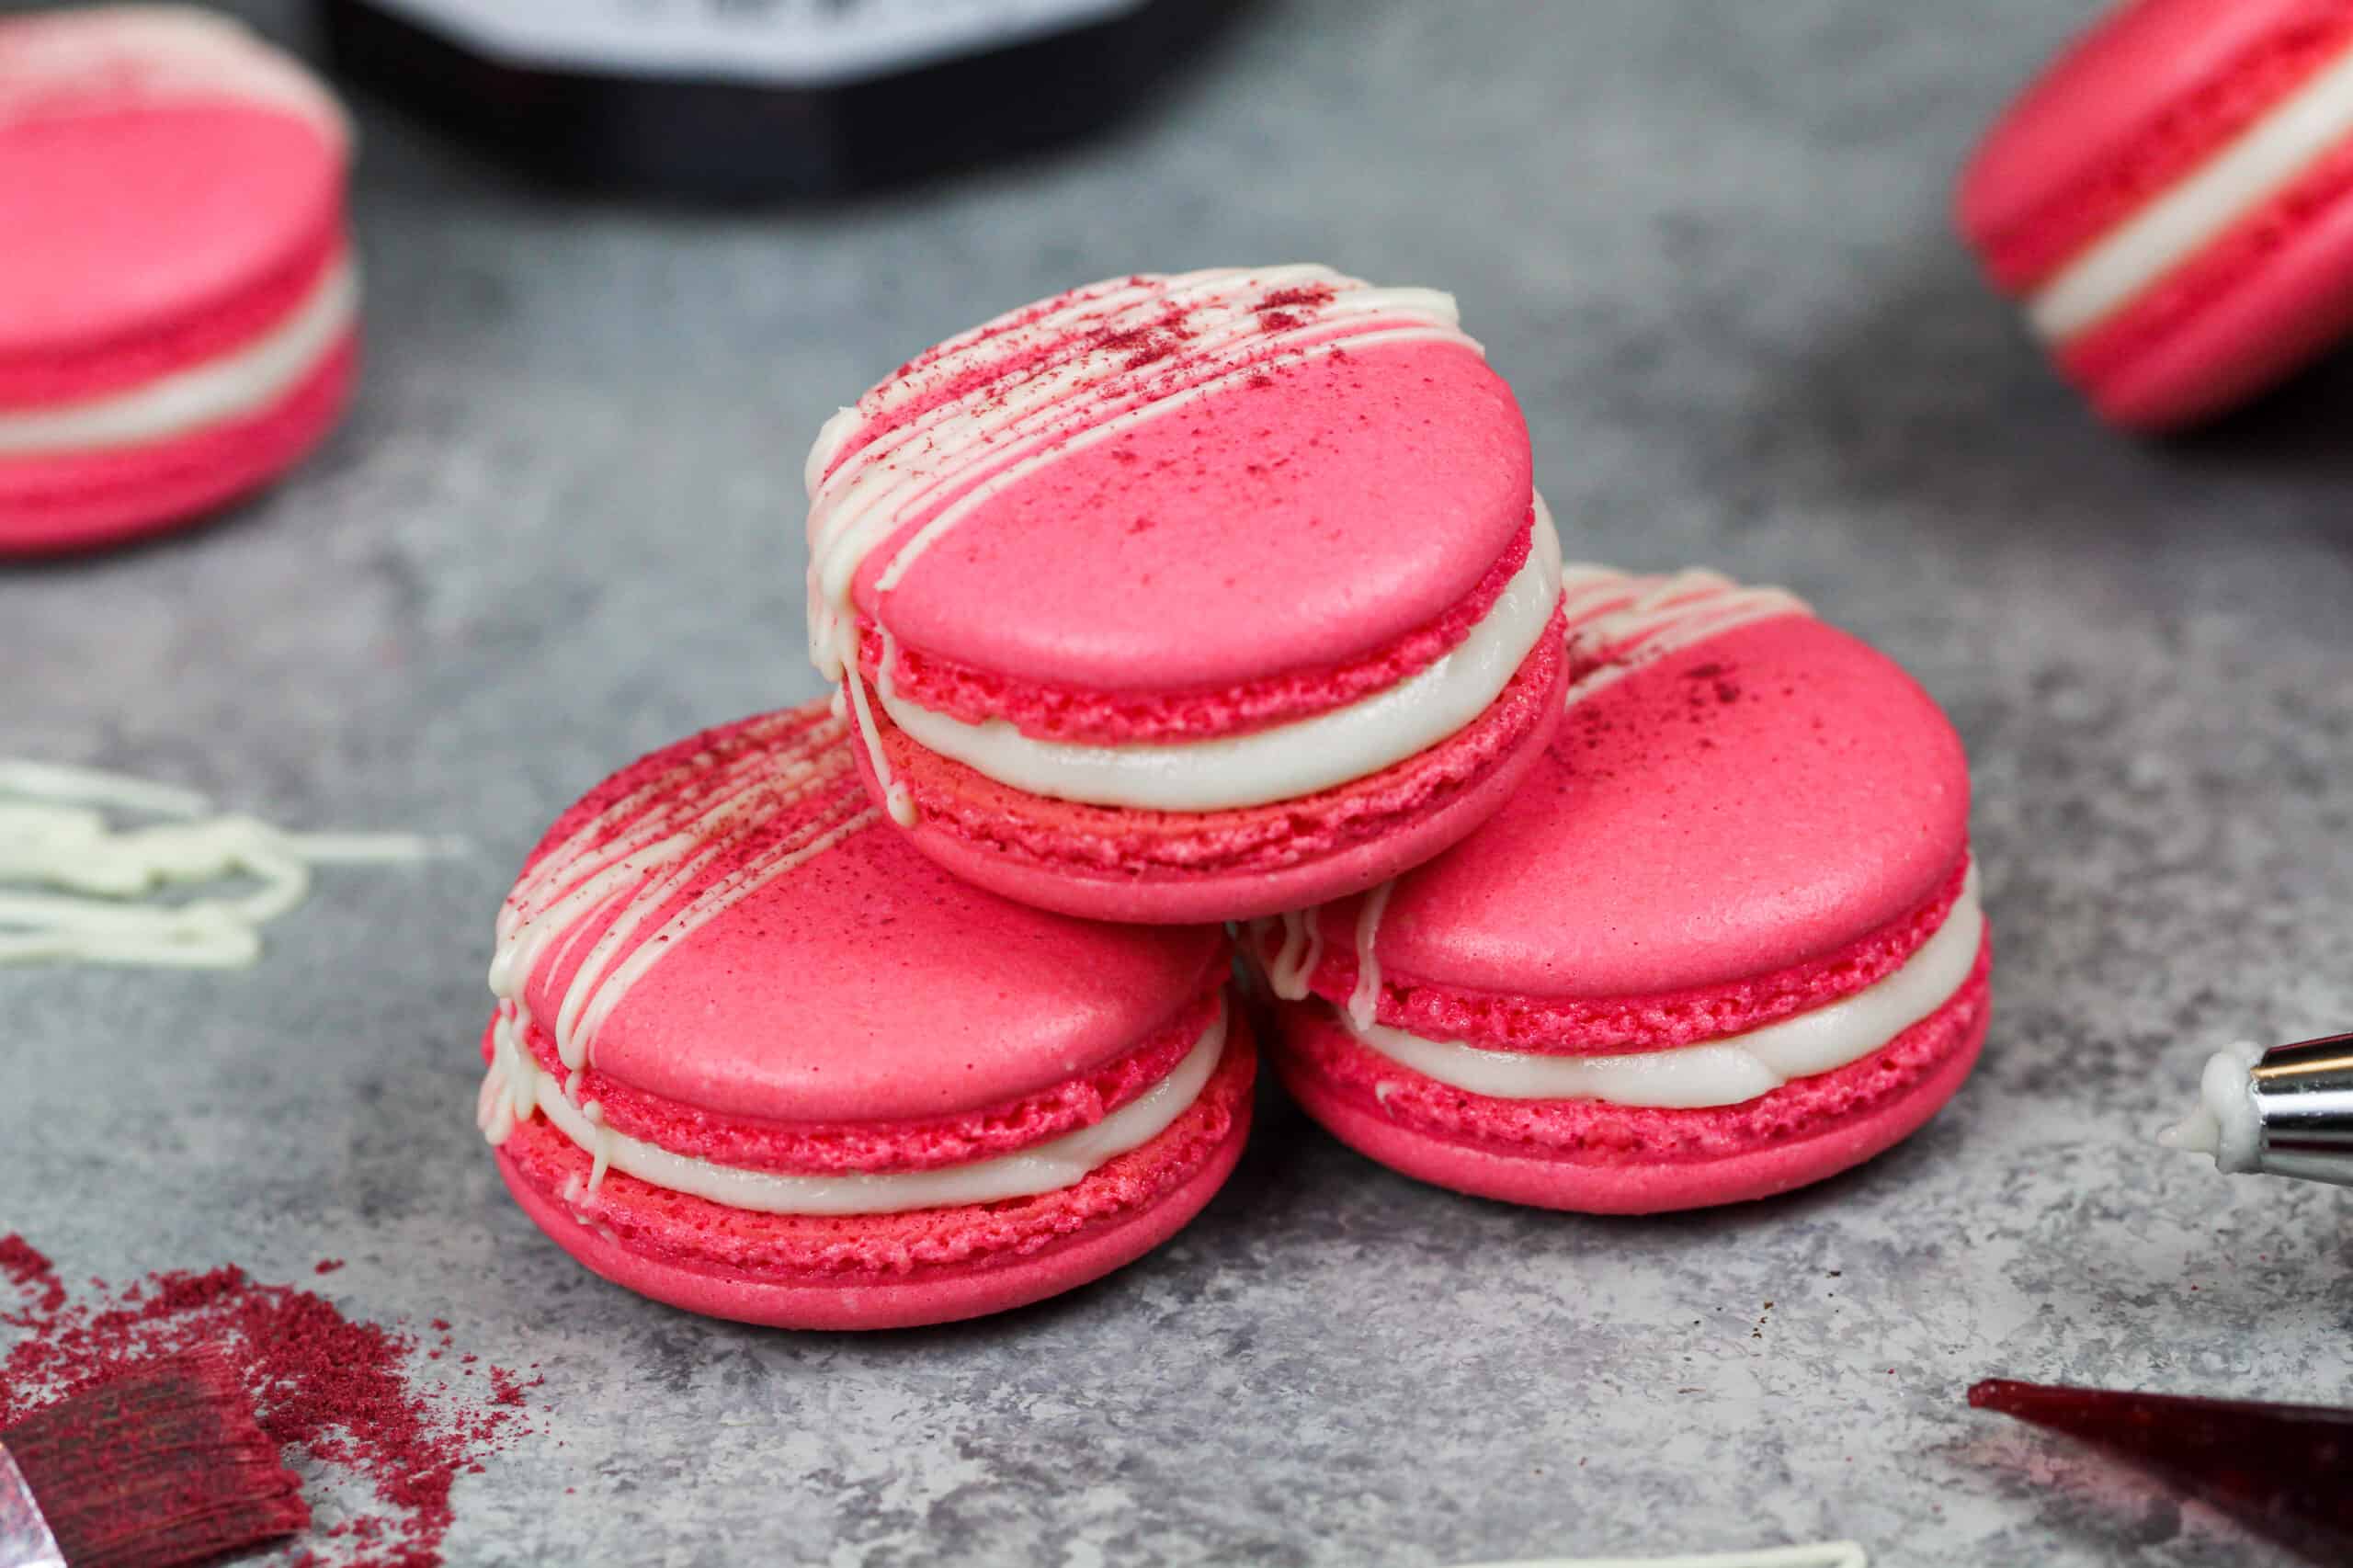 image of french raspberry macarons that have been filled with raspberry jam and buttercream and drizzled with white chocolate as a decoration